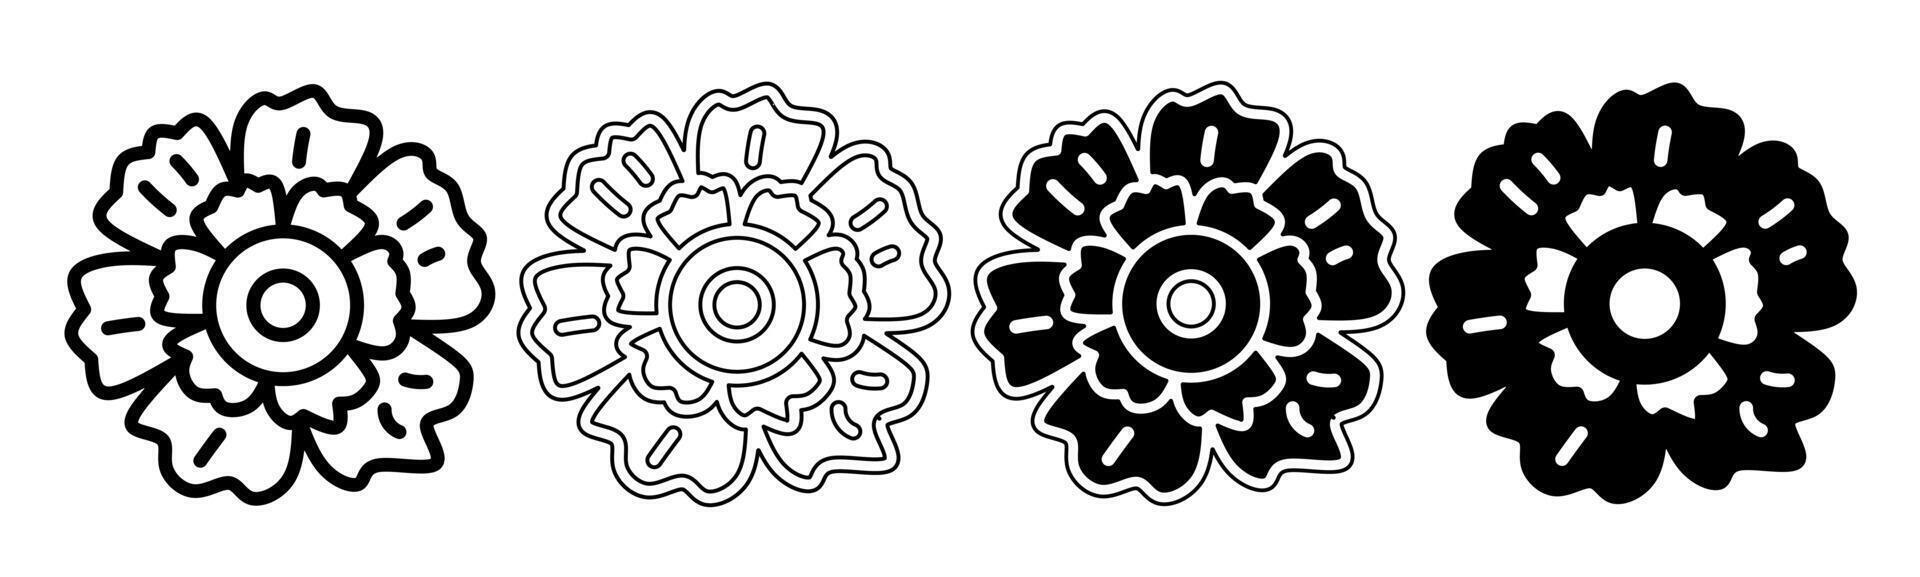 Black and white illustration of a flower. Flower icon collection with line. Stock vector illustration.